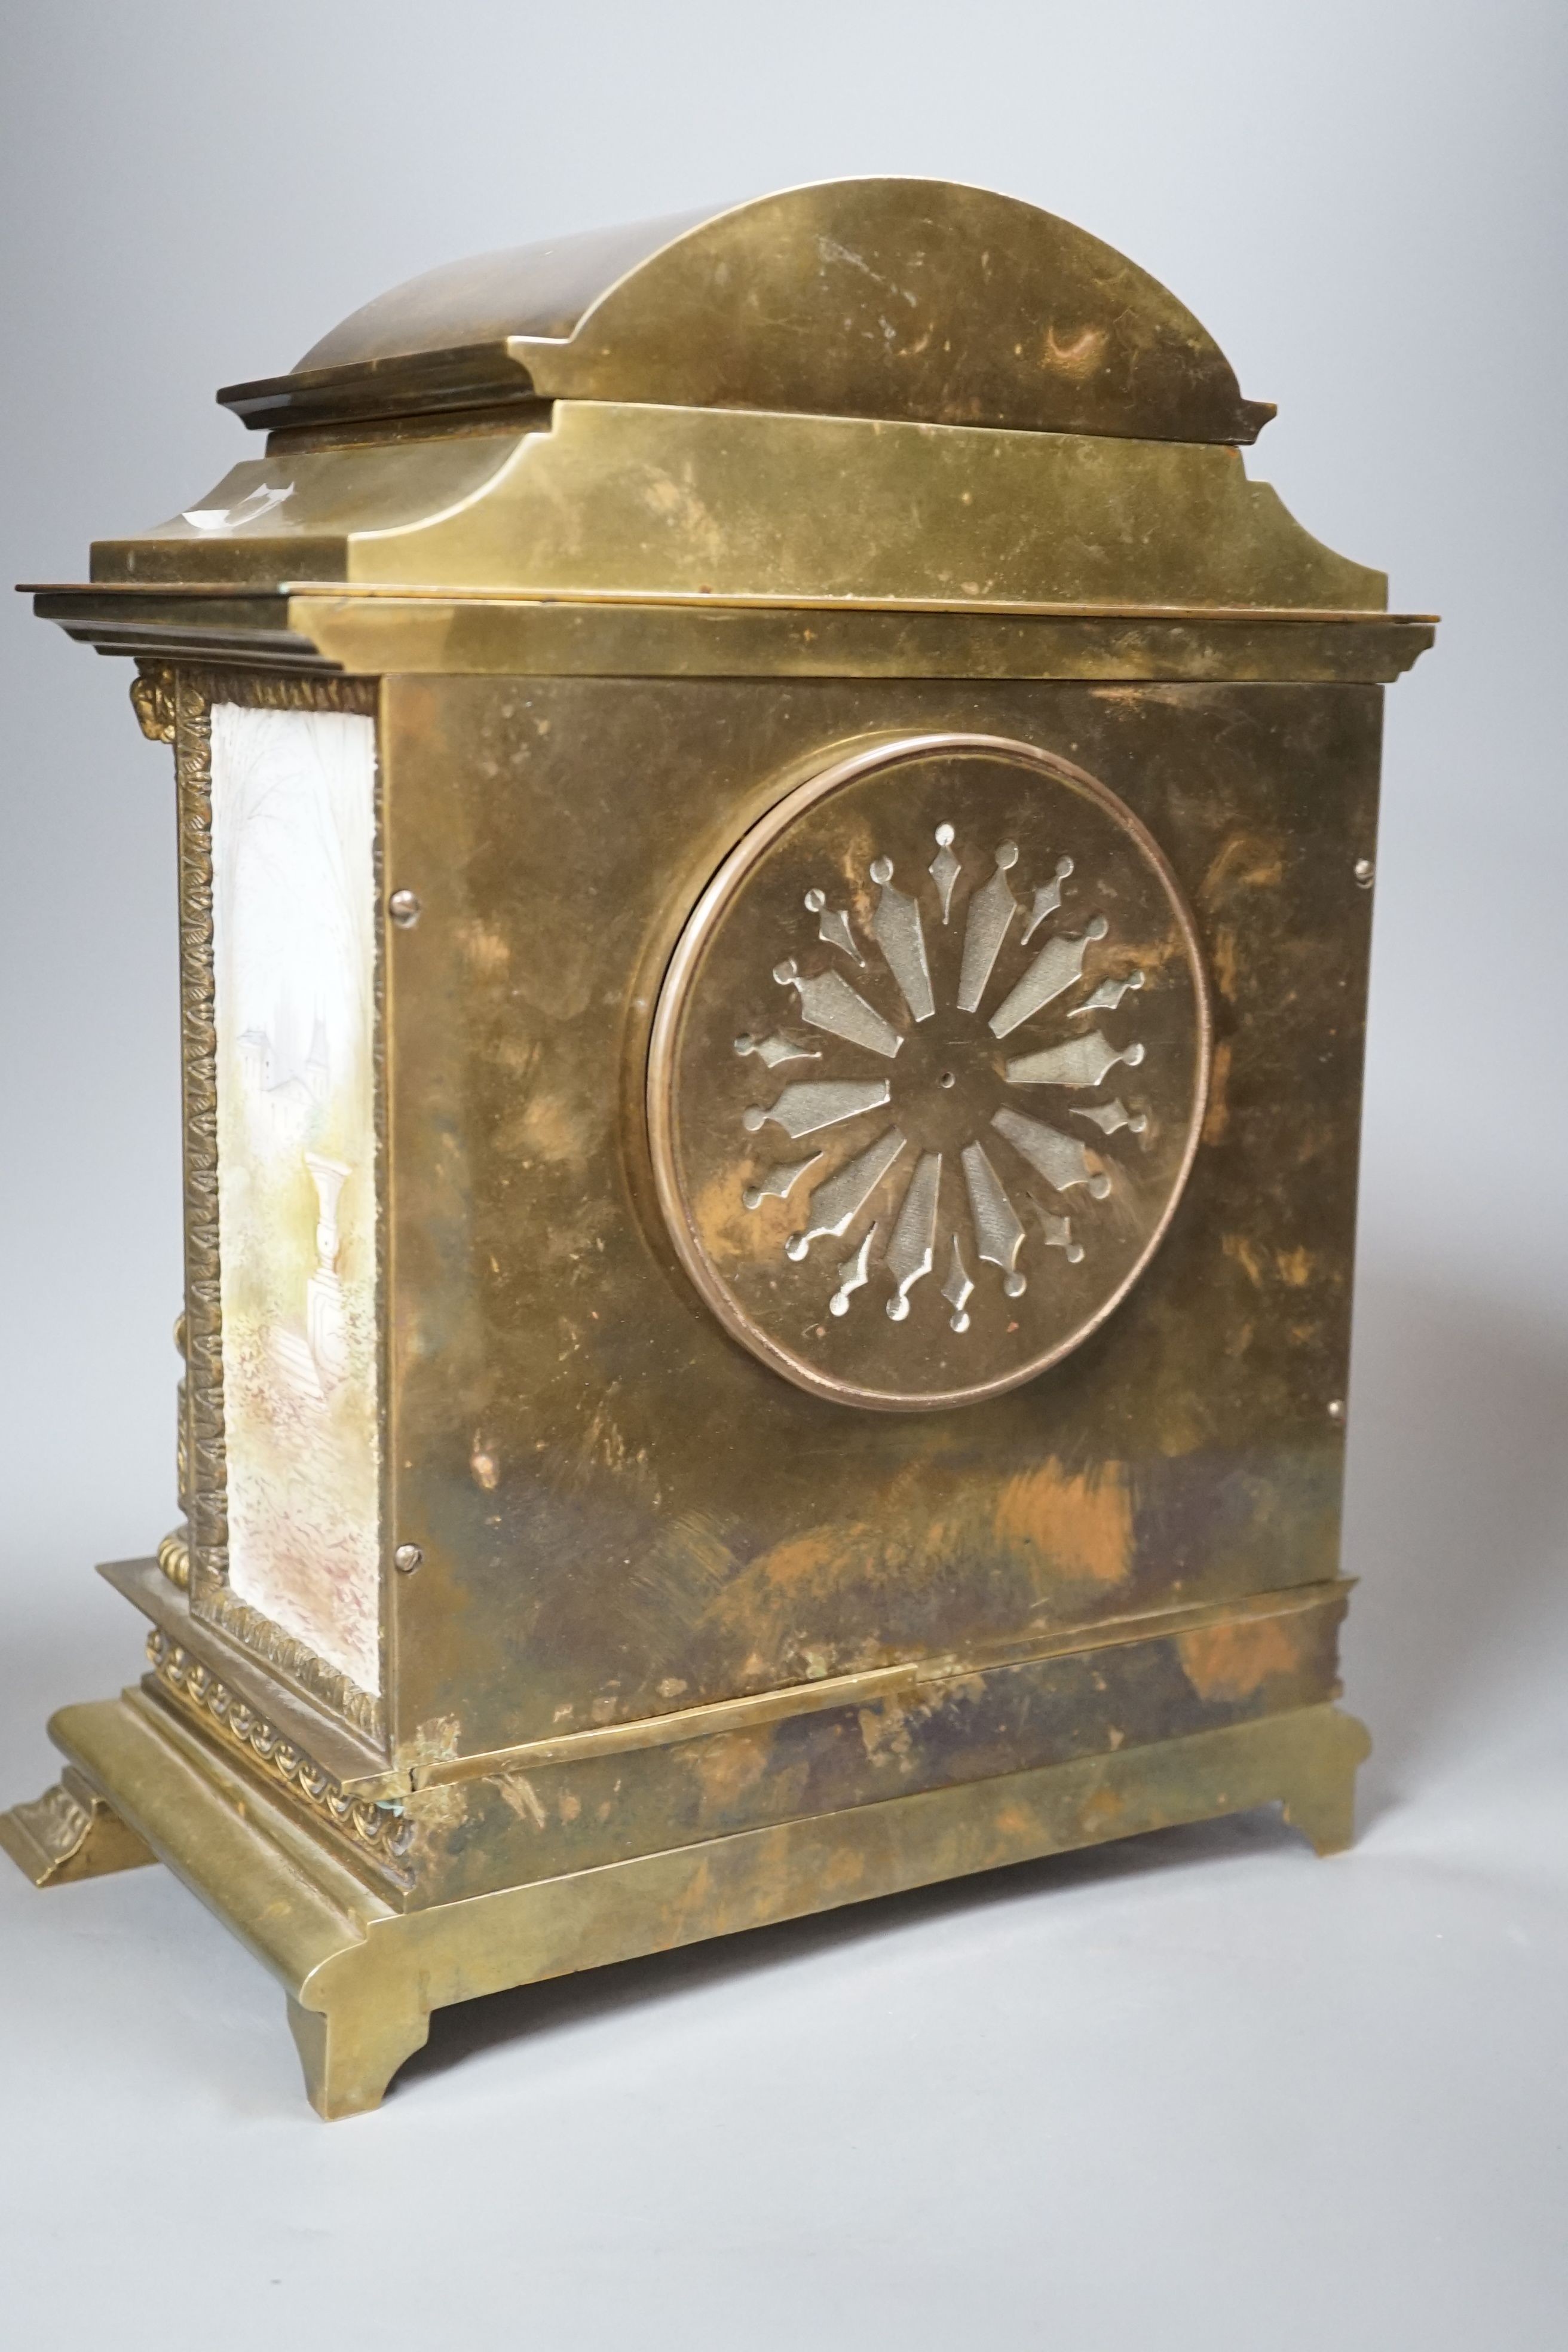 A French porcelain mounted brass mantel clock-31 cms high.